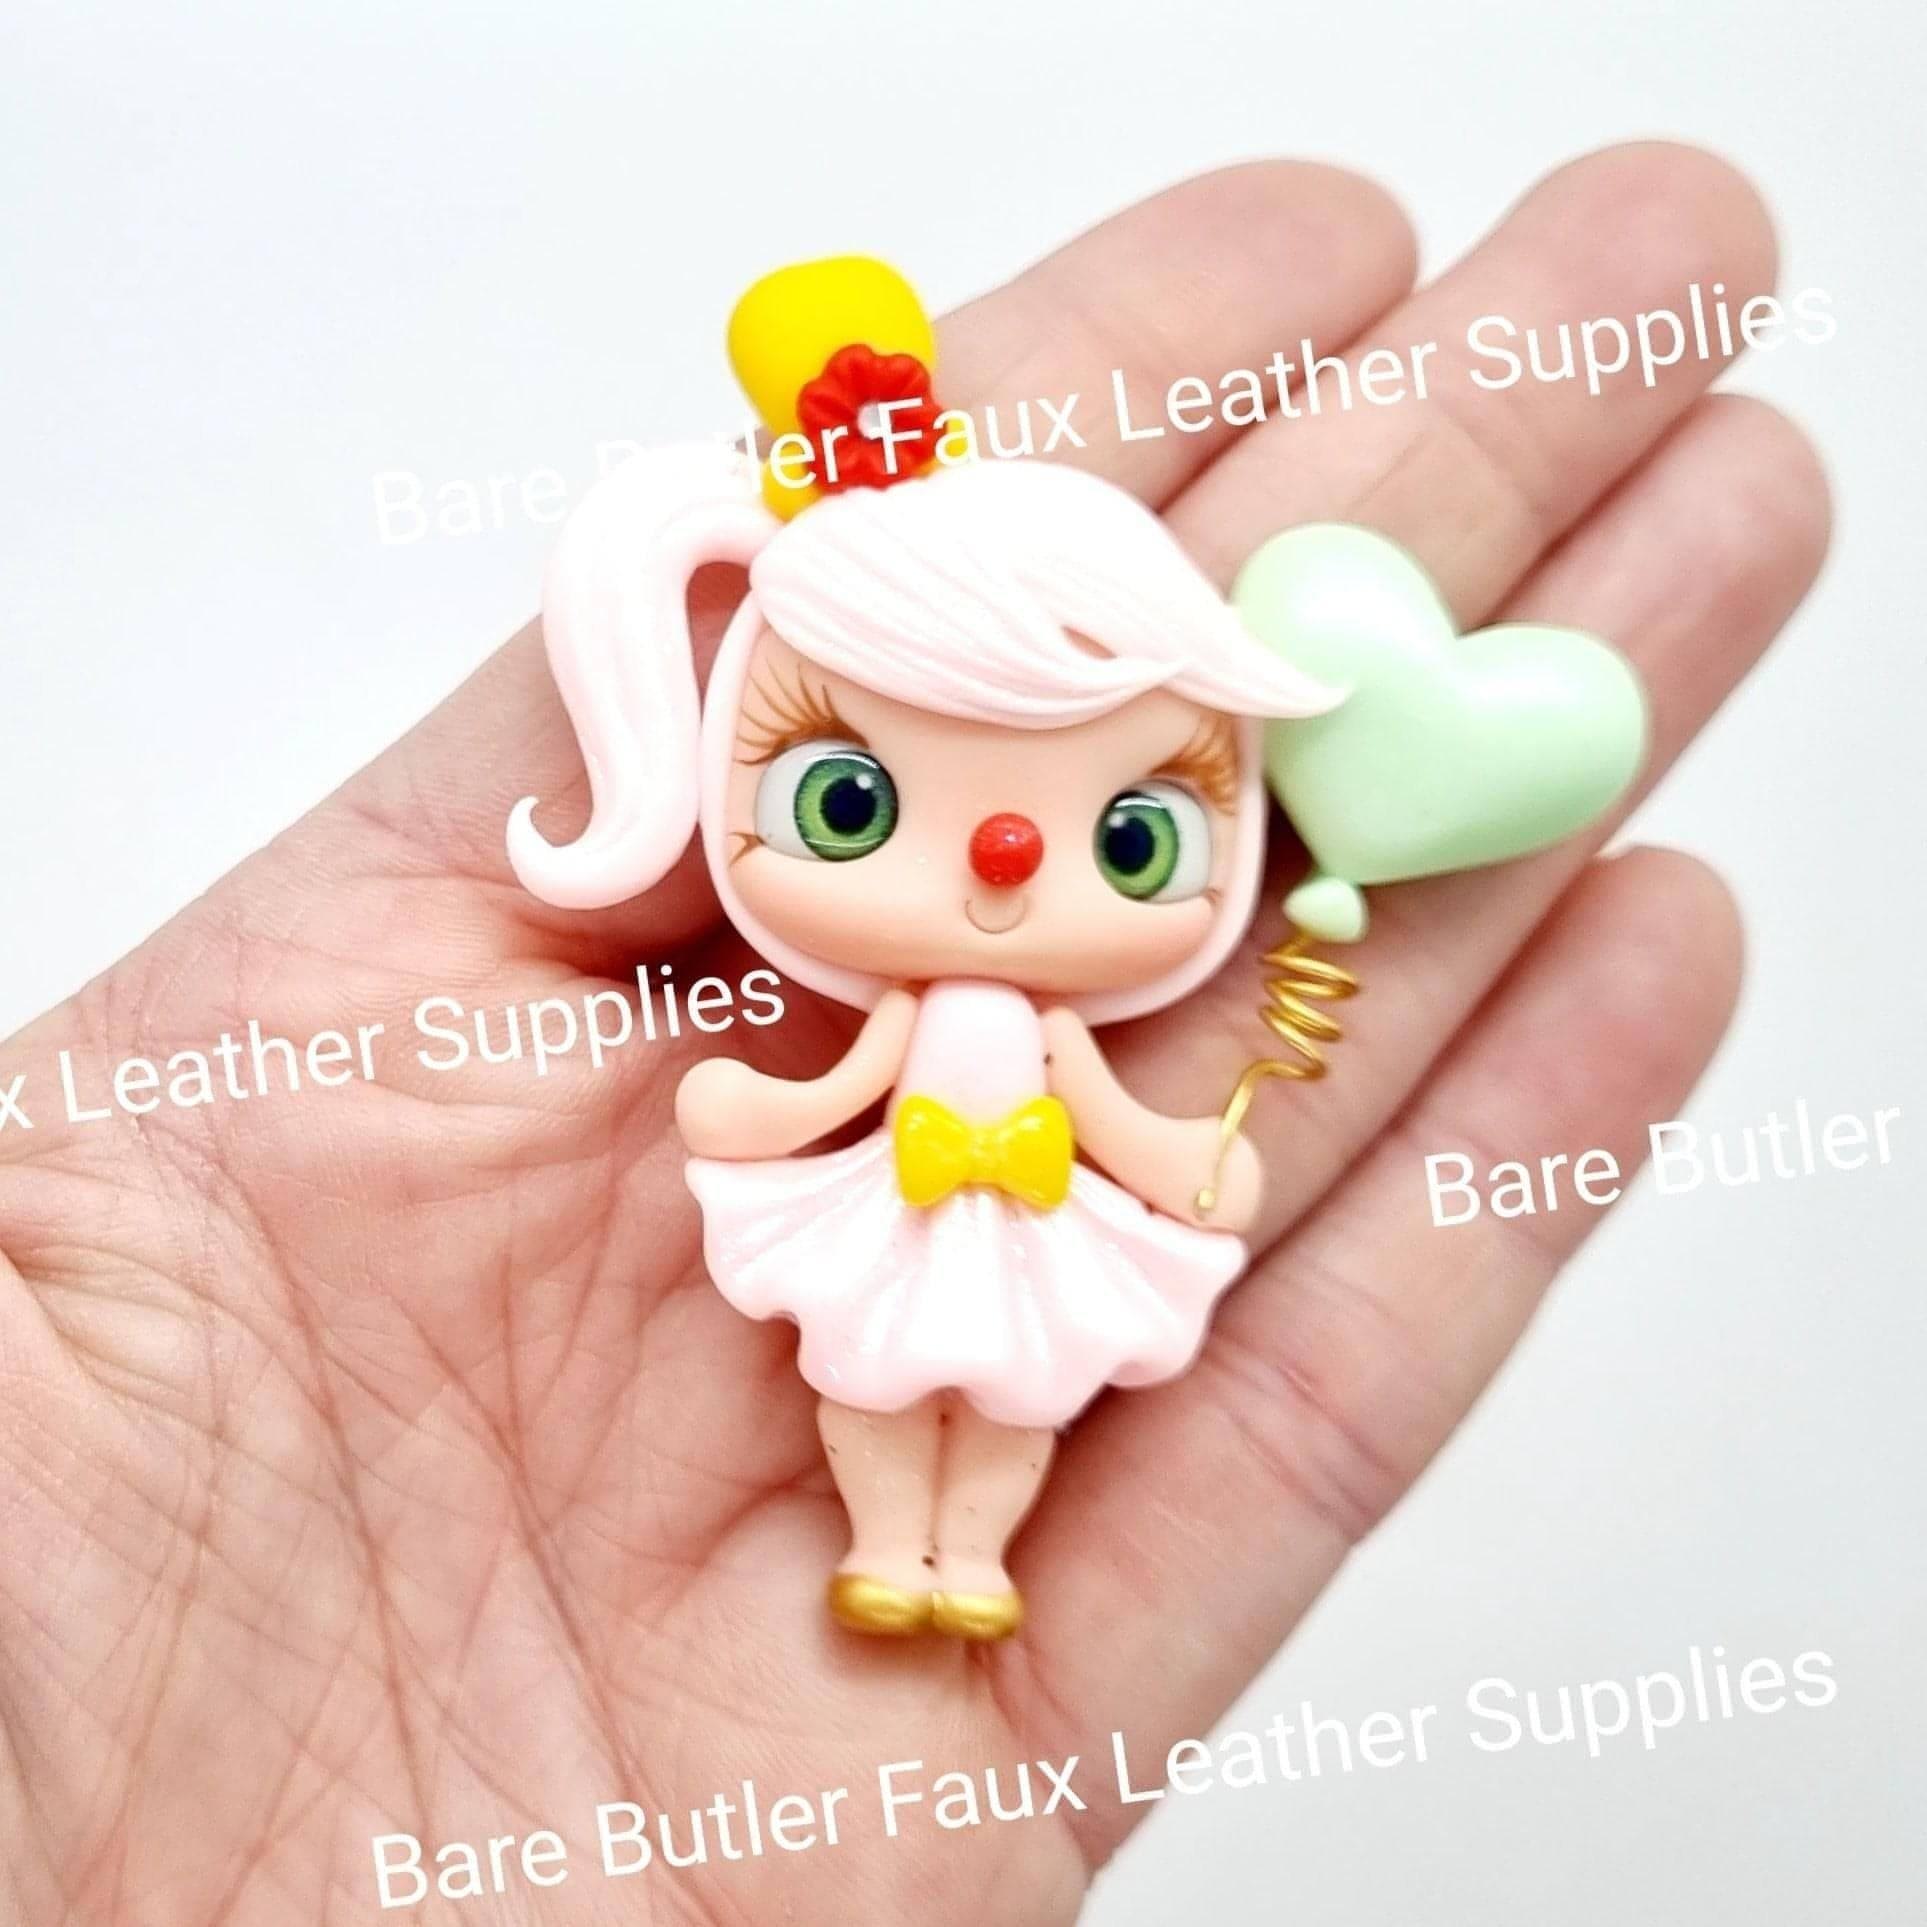 Clowning Around - Green Heart Balloon - Circus, Clay, Clays, clown - Bare Butler Faux Leather Supplies 